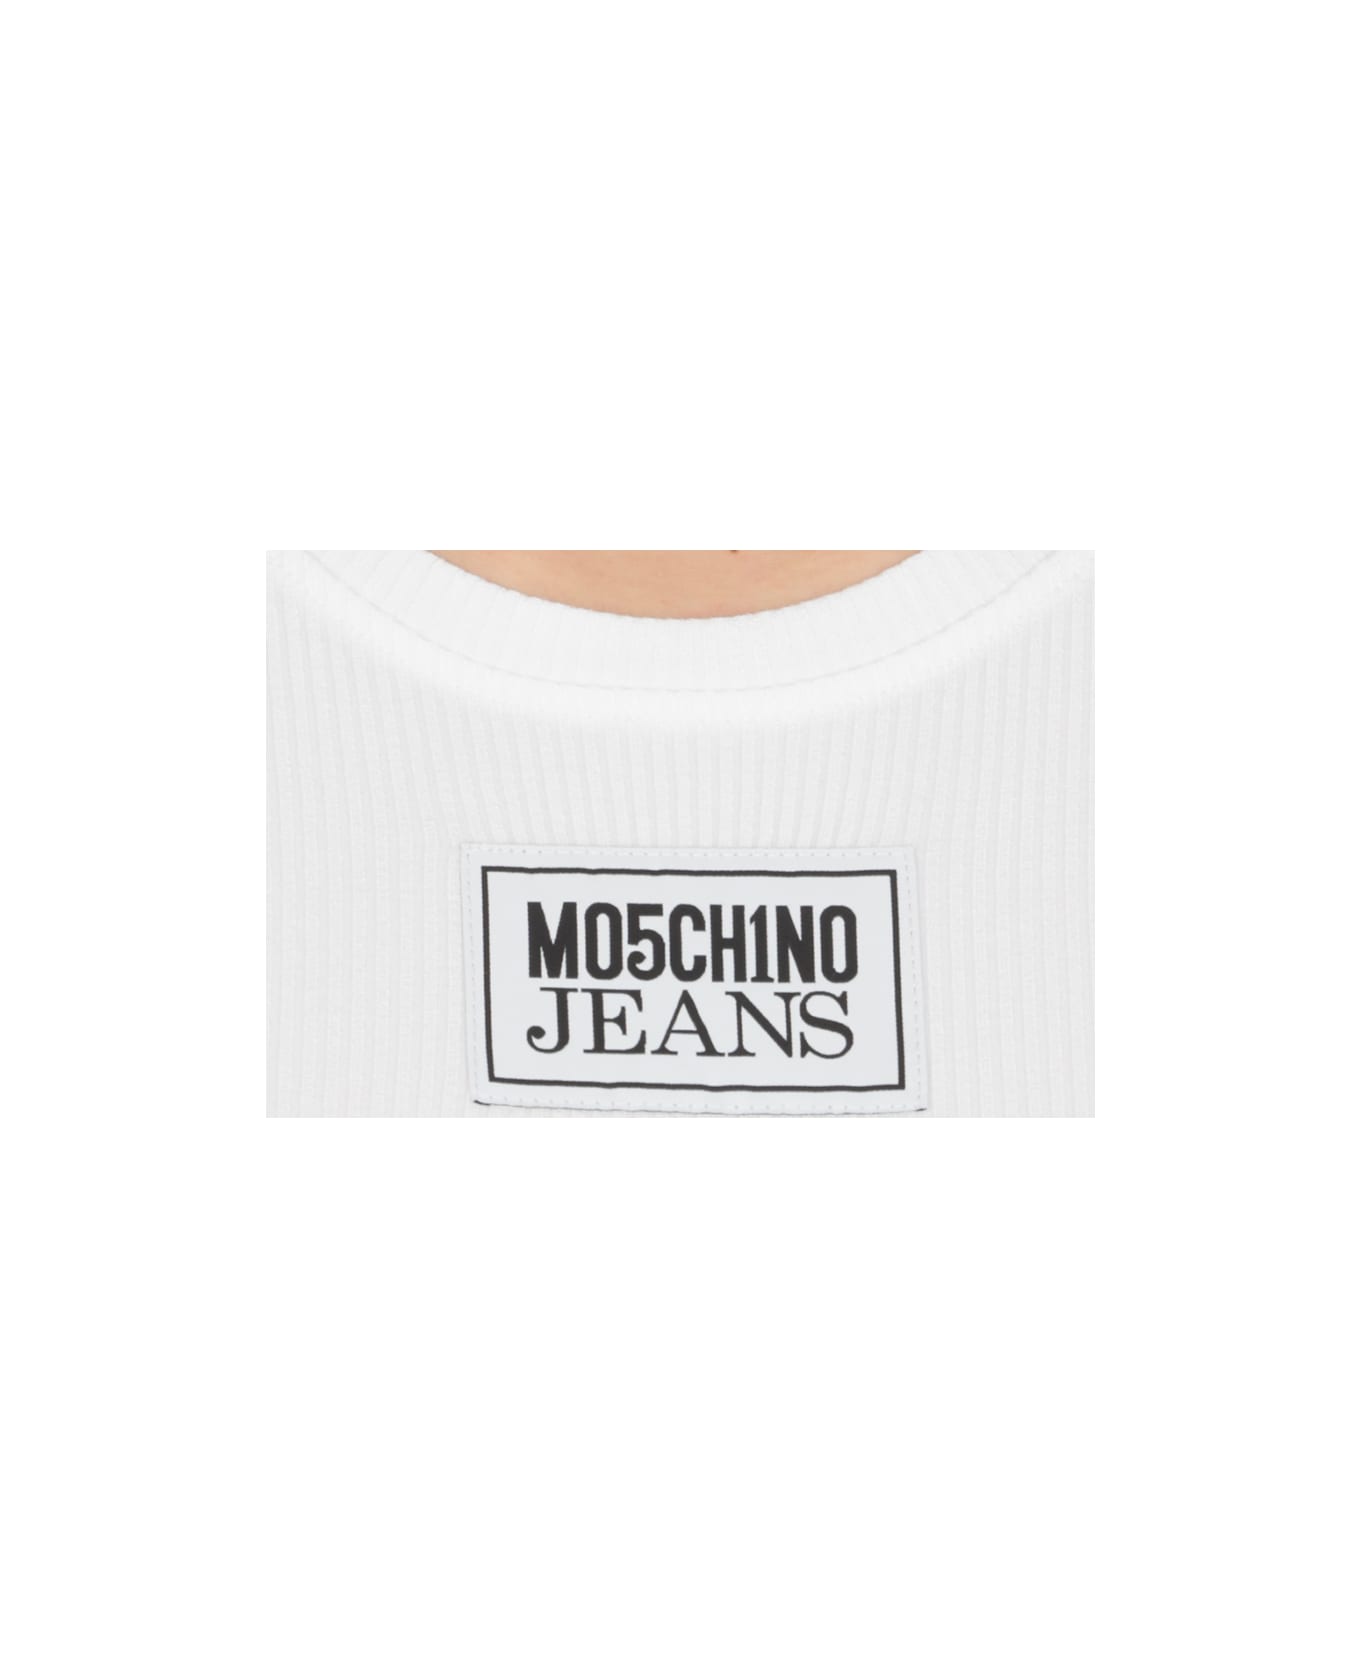 M05CH1N0 Jeans Sweater With Logo - White